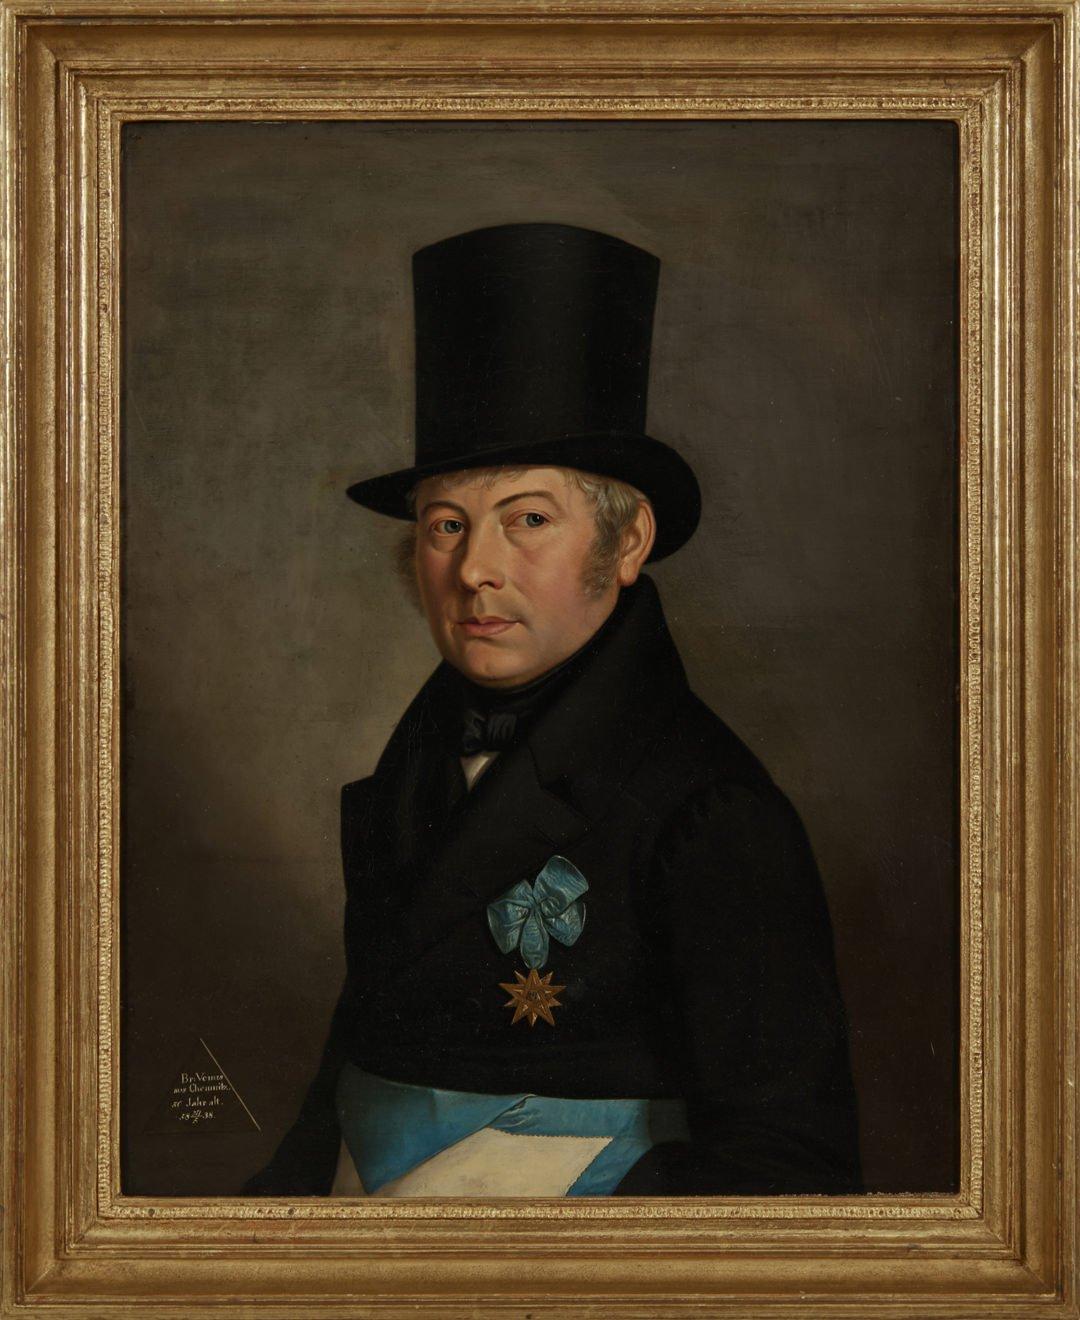 19th Century German School, Gentleman with Top Hat, 1839 - Painting by Unknown